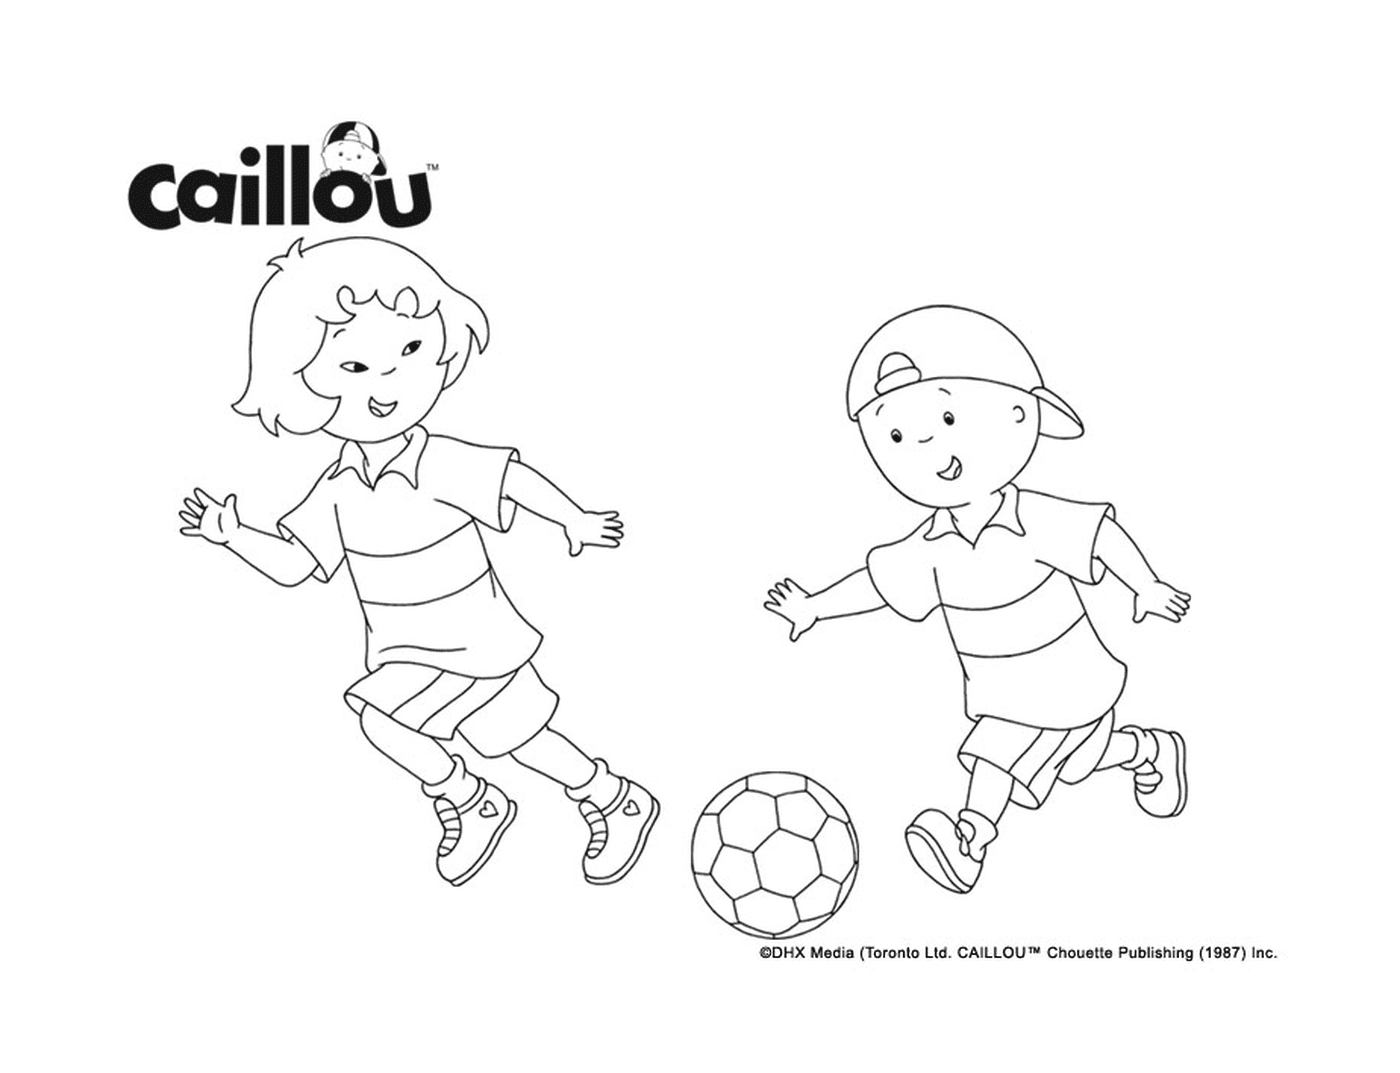  Caillou and Sarah play football to prepare for the FIFA World Cup 